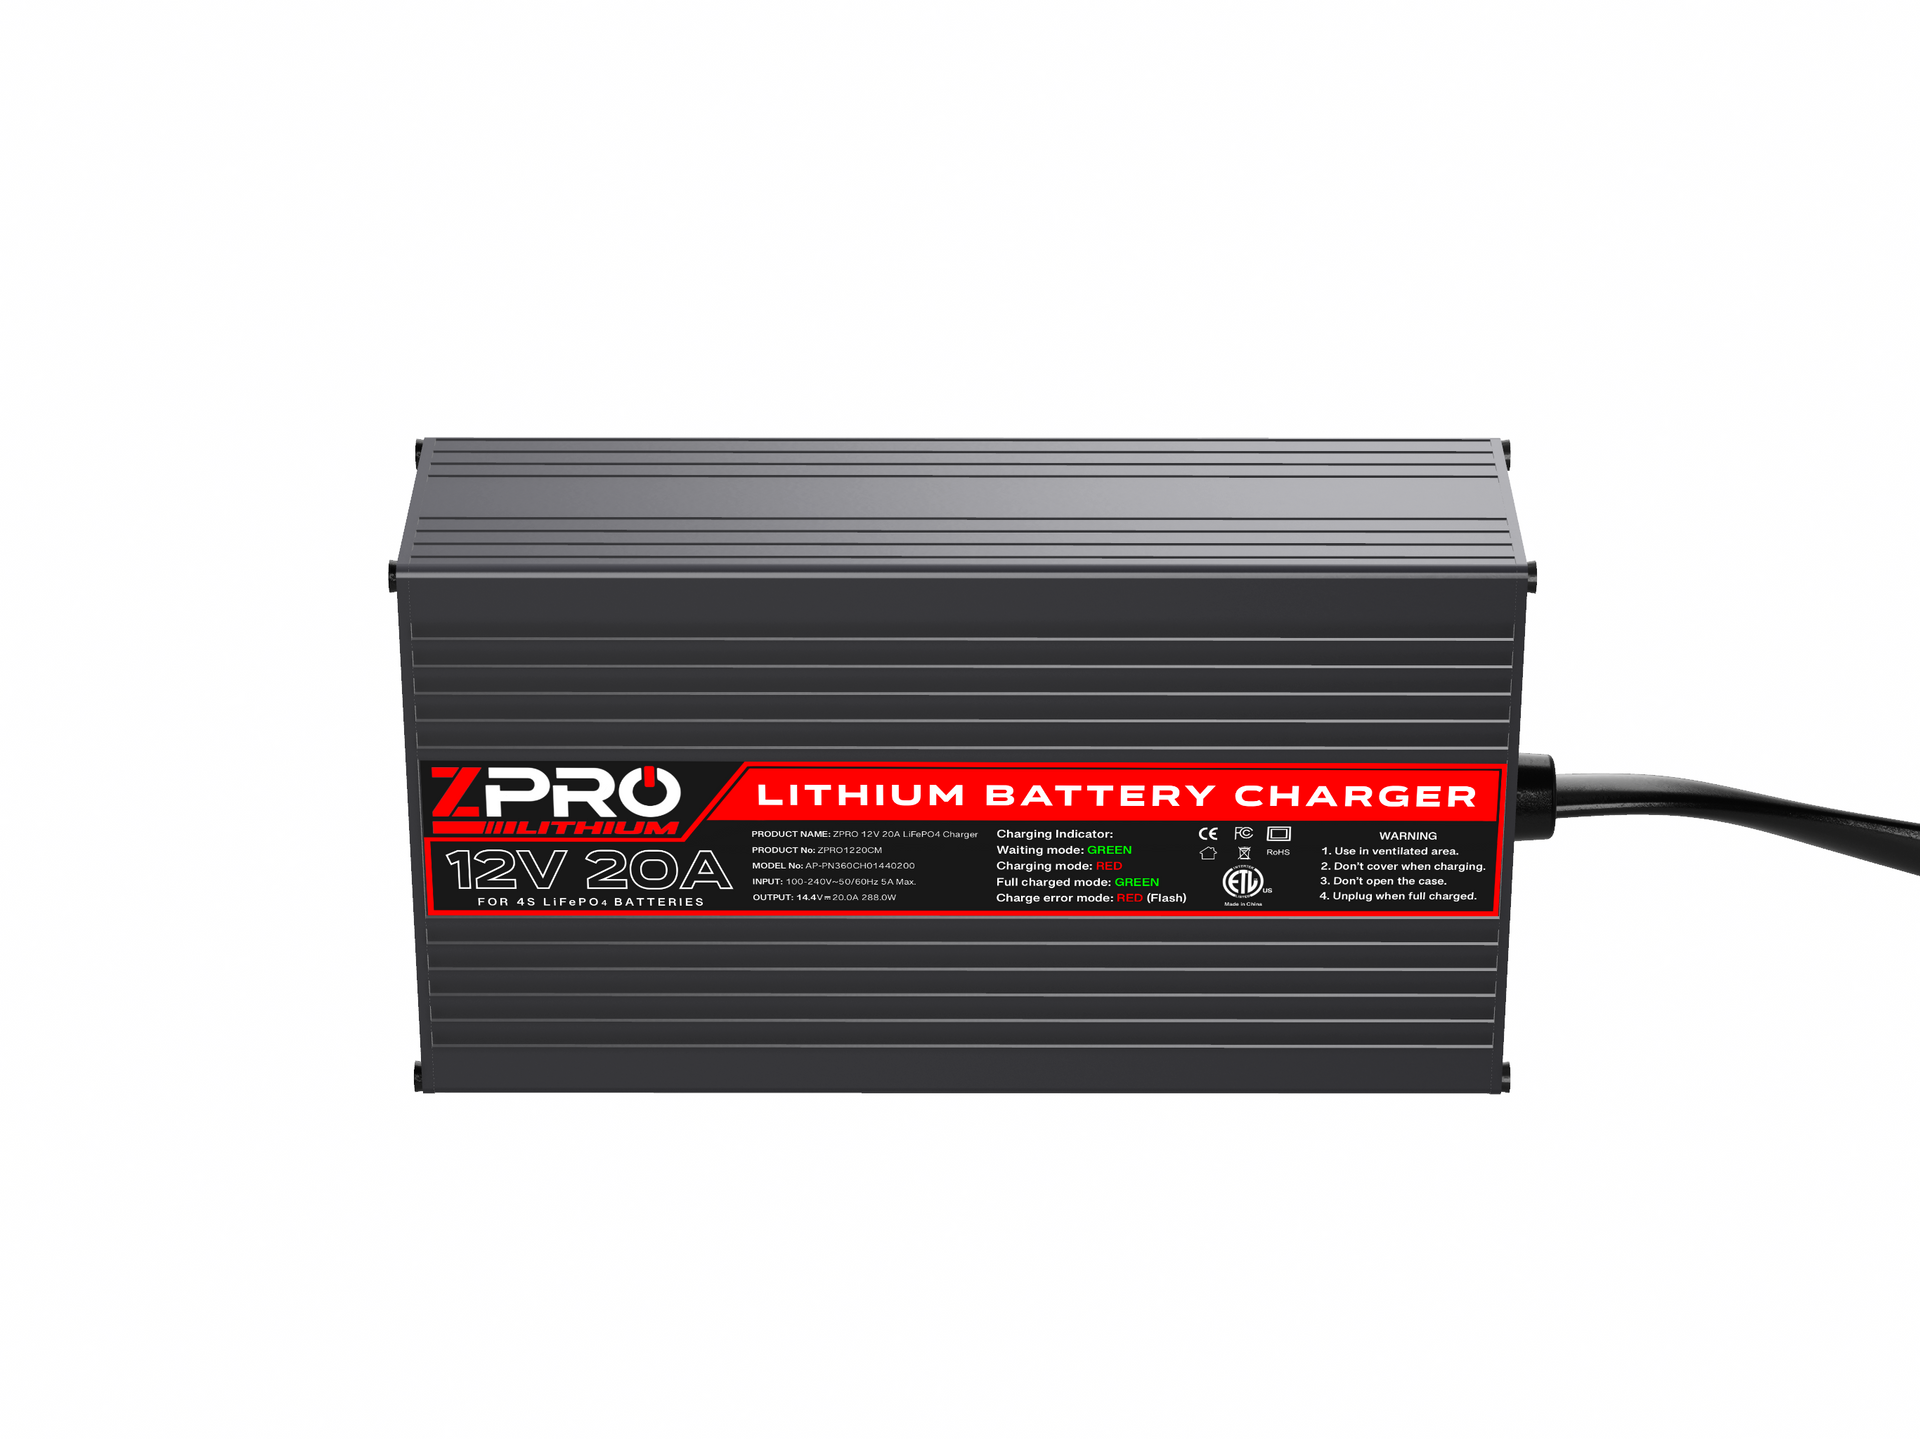 12V20A LITHIUM CHARGER – ZPRO LITHIUM